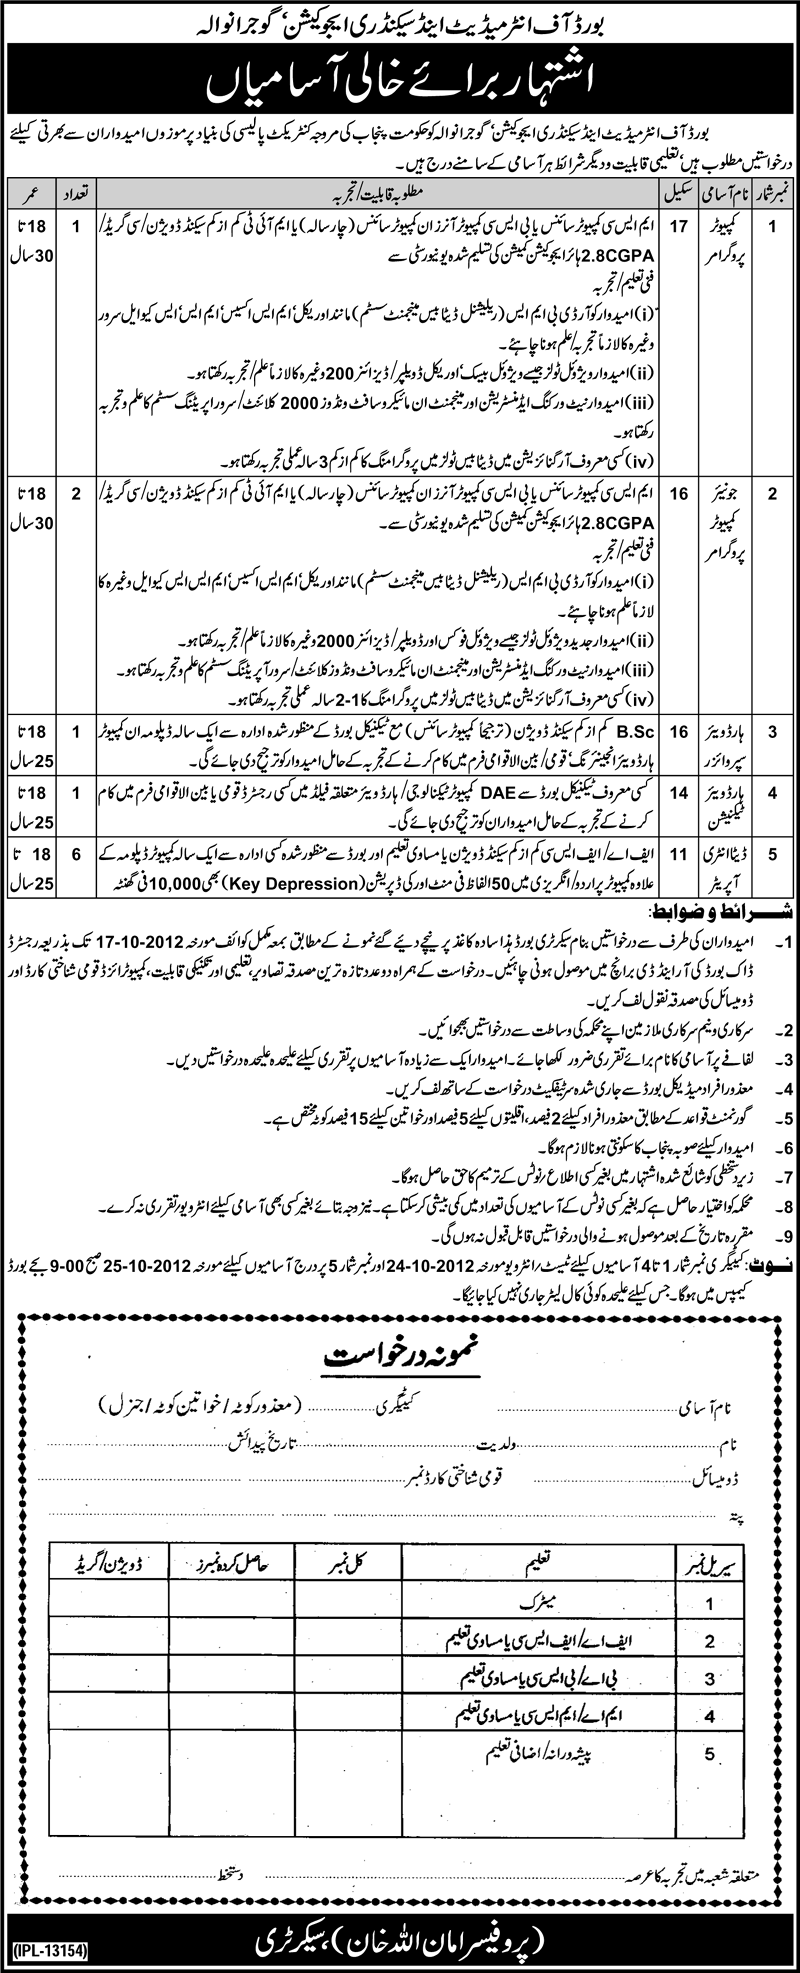 BISE Gujranwala Requires IT Staff (Government Job)